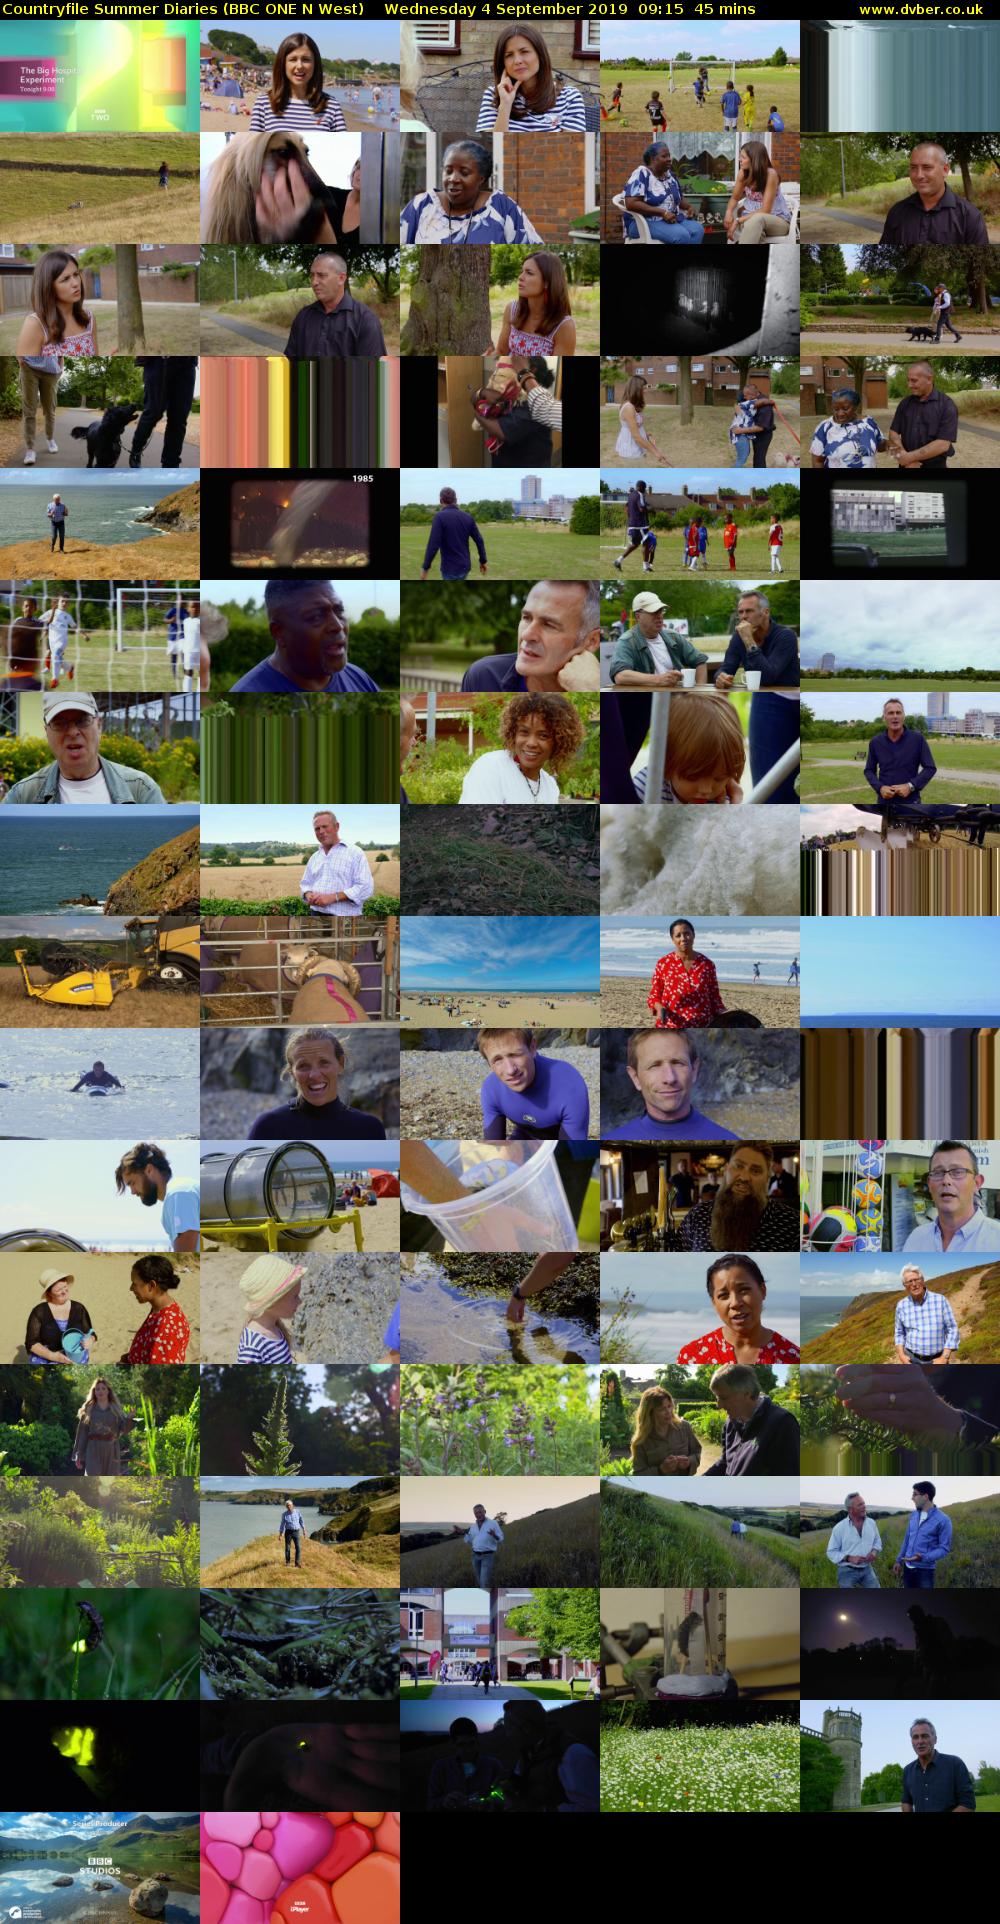 Countryfile Summer Diaries (BBC ONE N West) Wednesday 4 September 2019 09:15 - 10:00